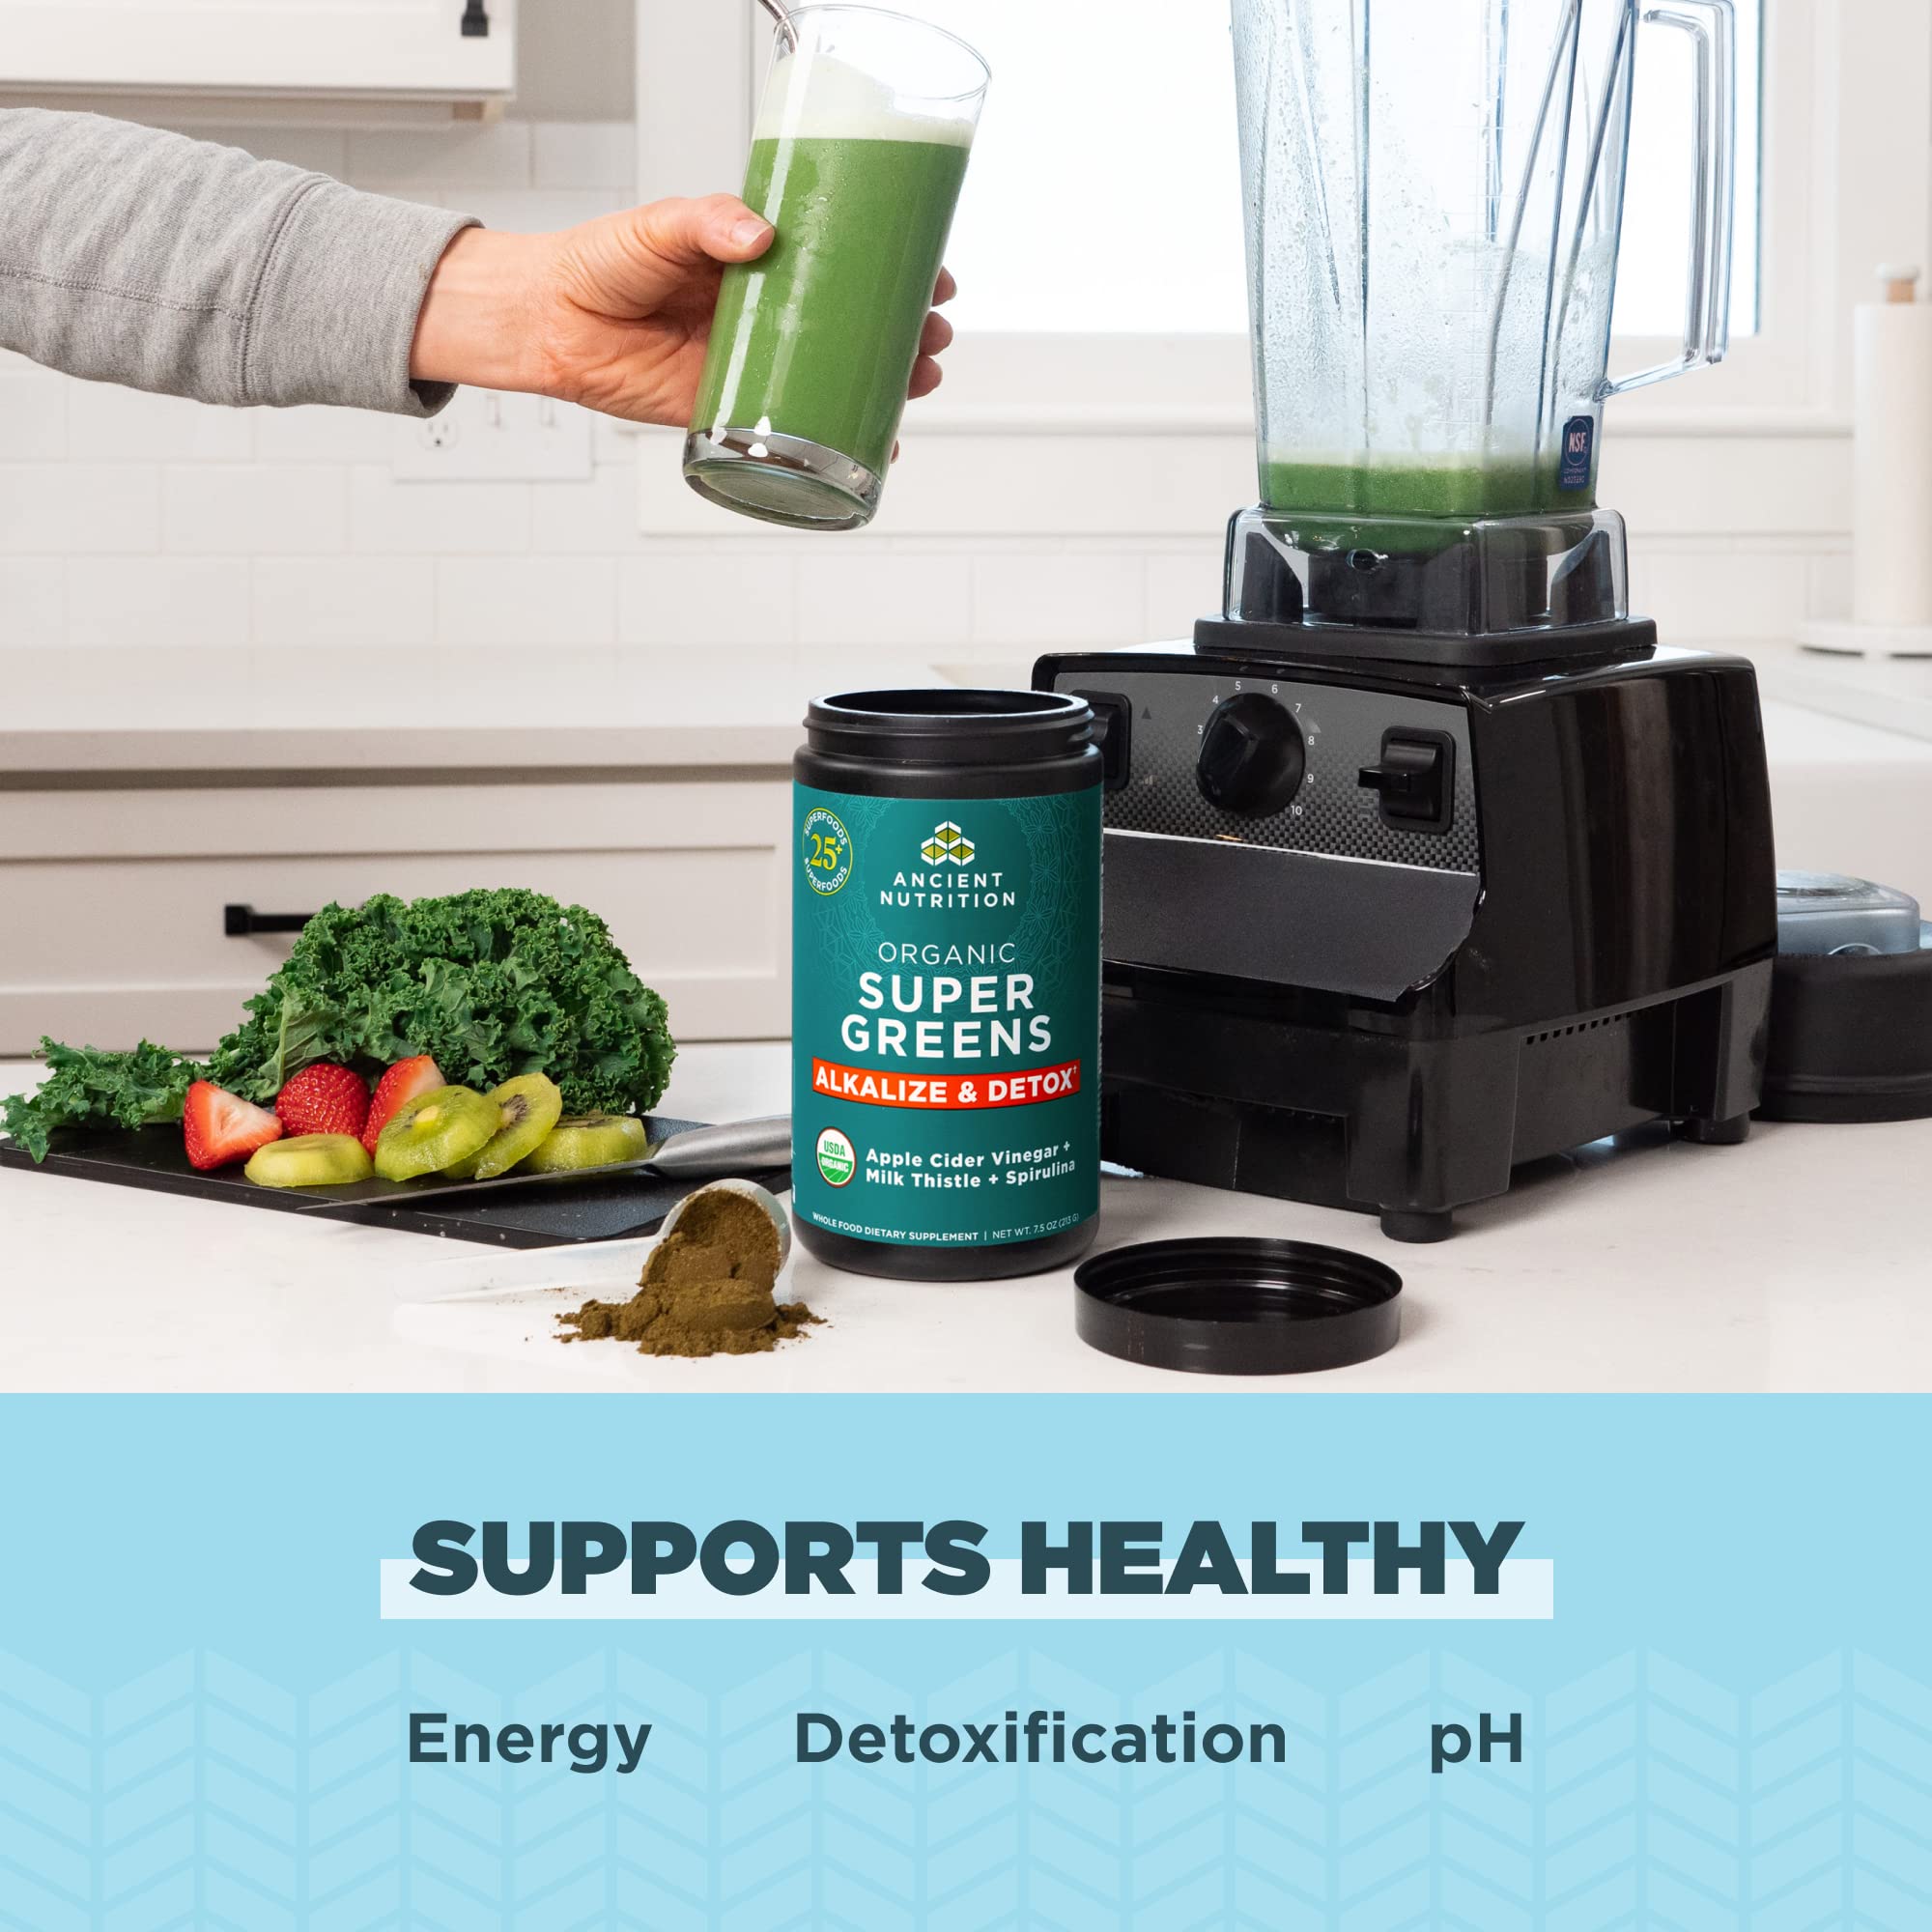 Ancient Nutrition Supergreens Alkalize & Detox Powder, Organic Superfood Powder Made from Real Fruits, Vegetables and Herbs, for Digestive and Energy Support, 25 Servings, 7.5oz